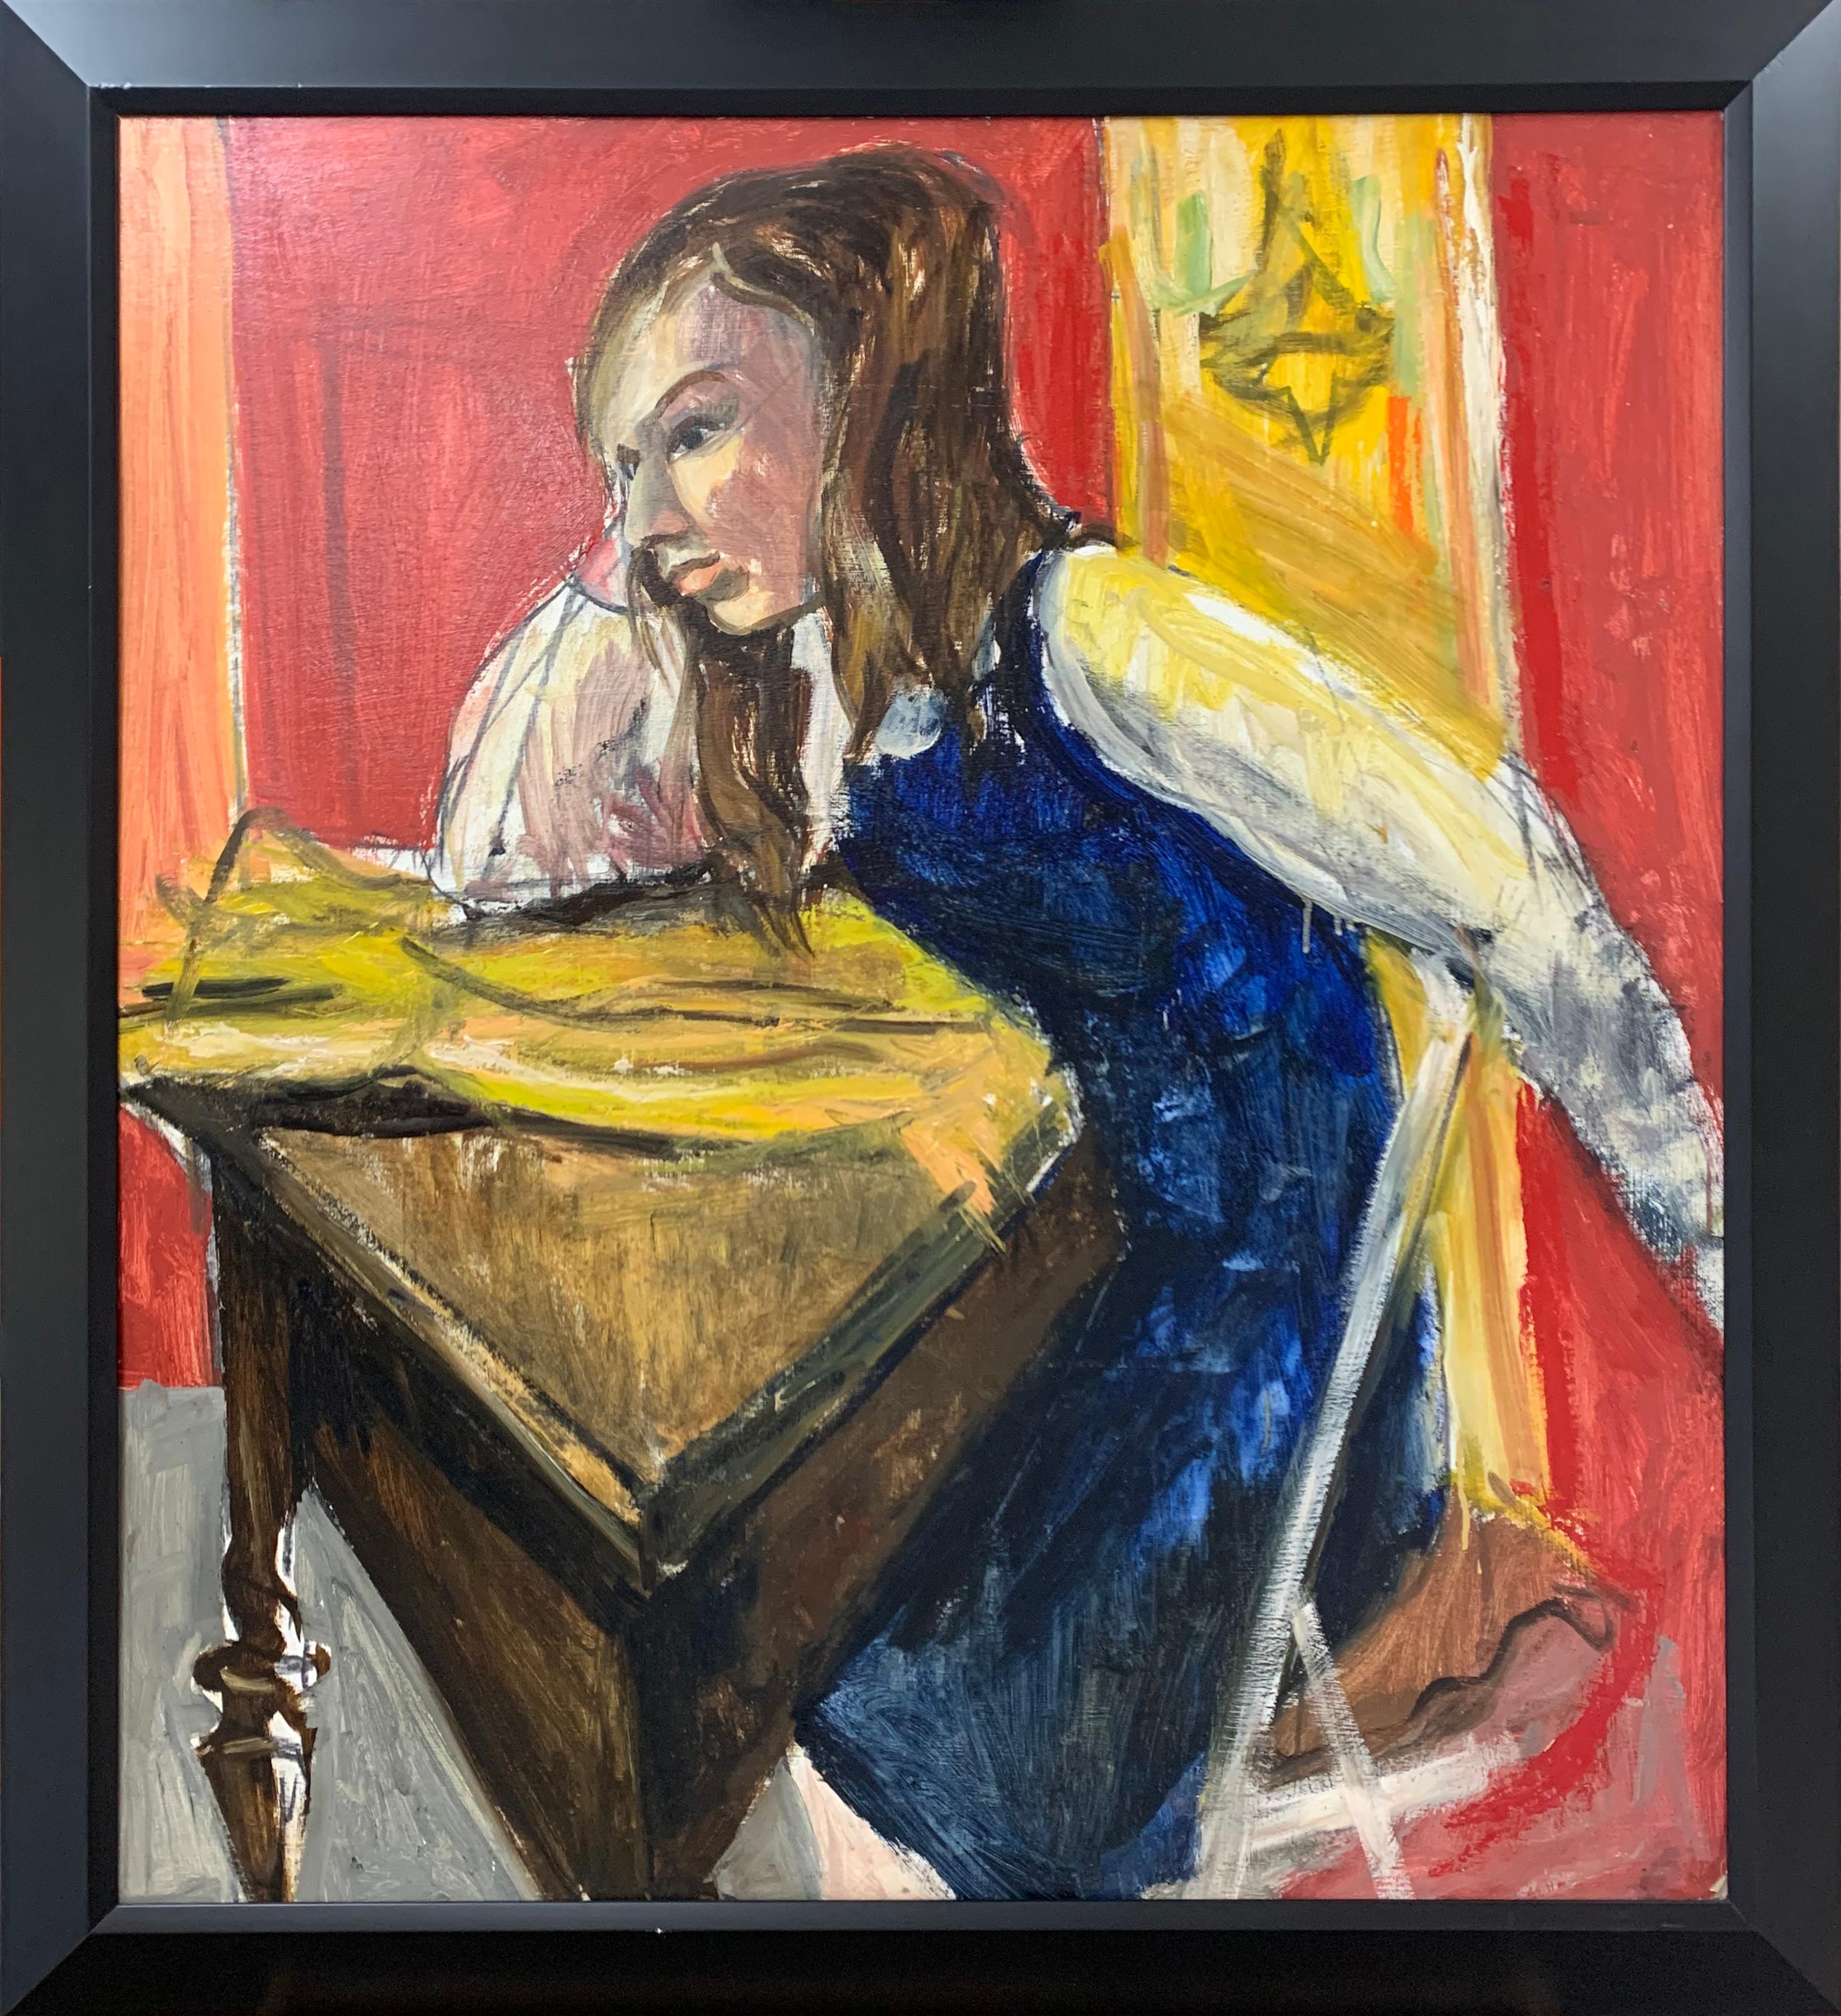 Girl at Desk, Expressionist Portrait of Young Woman by Philadelphia Artist